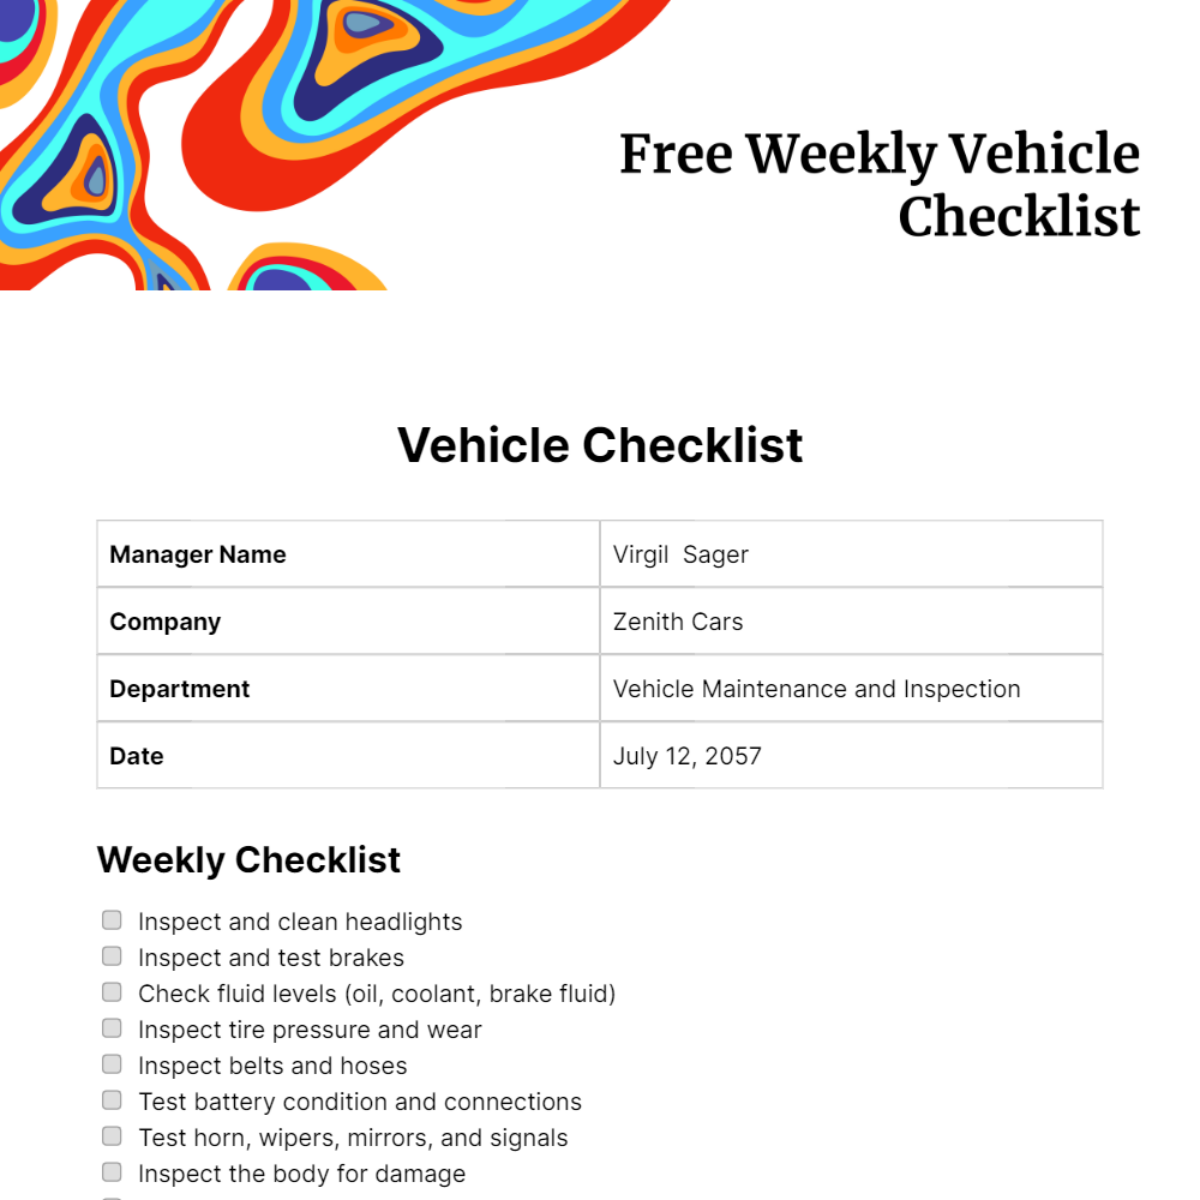 Free Weekly Vehicle Checklist Template